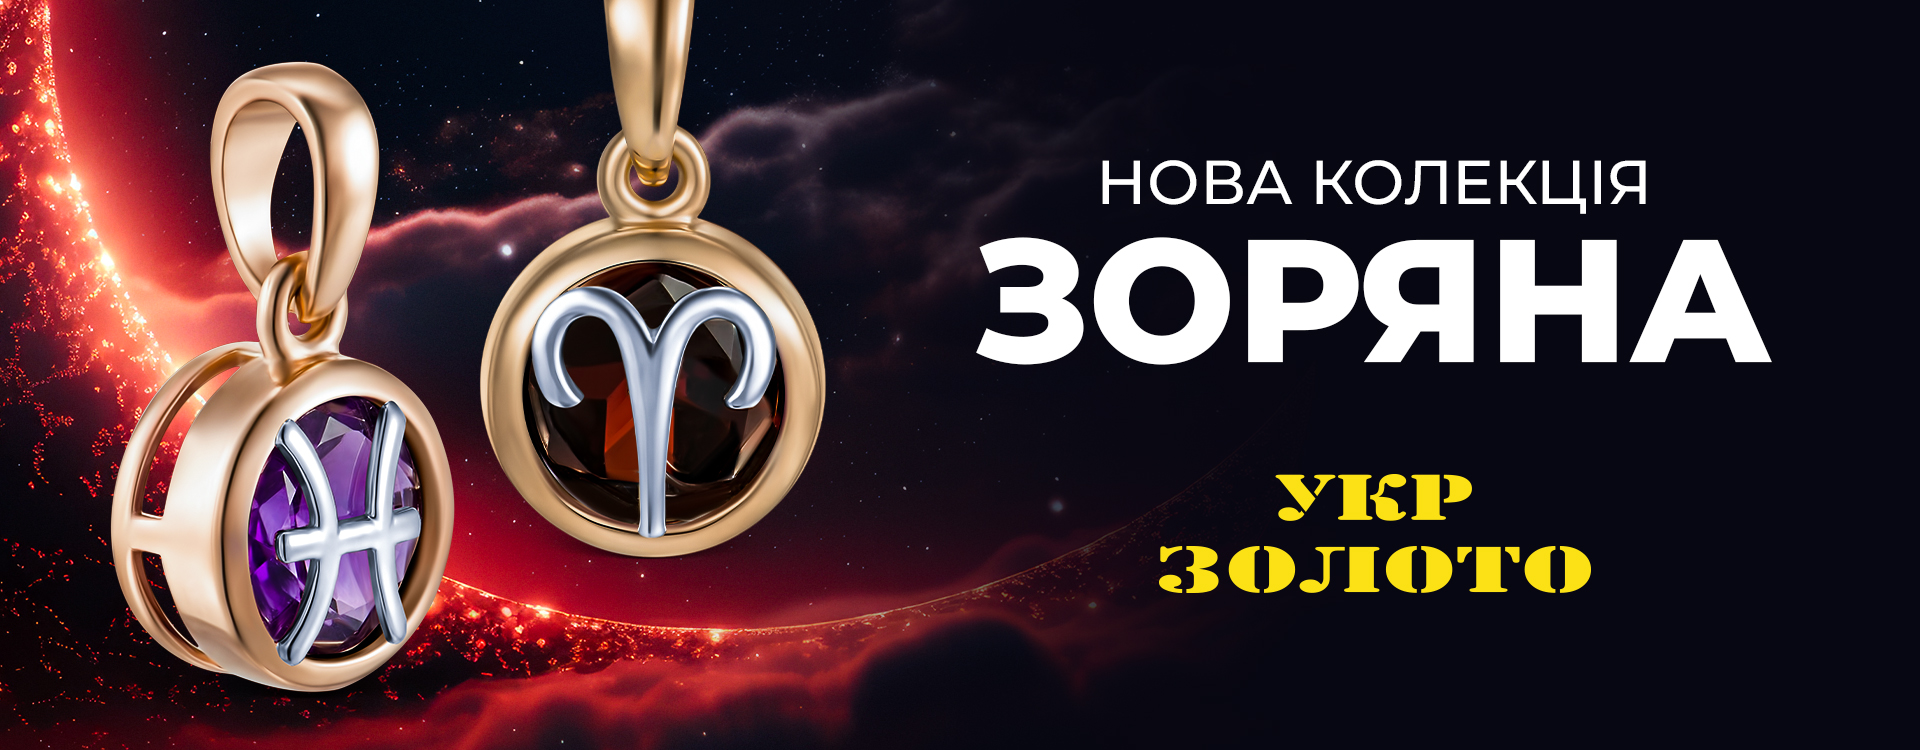 Search for your zodiac sign in Ukrzoloto